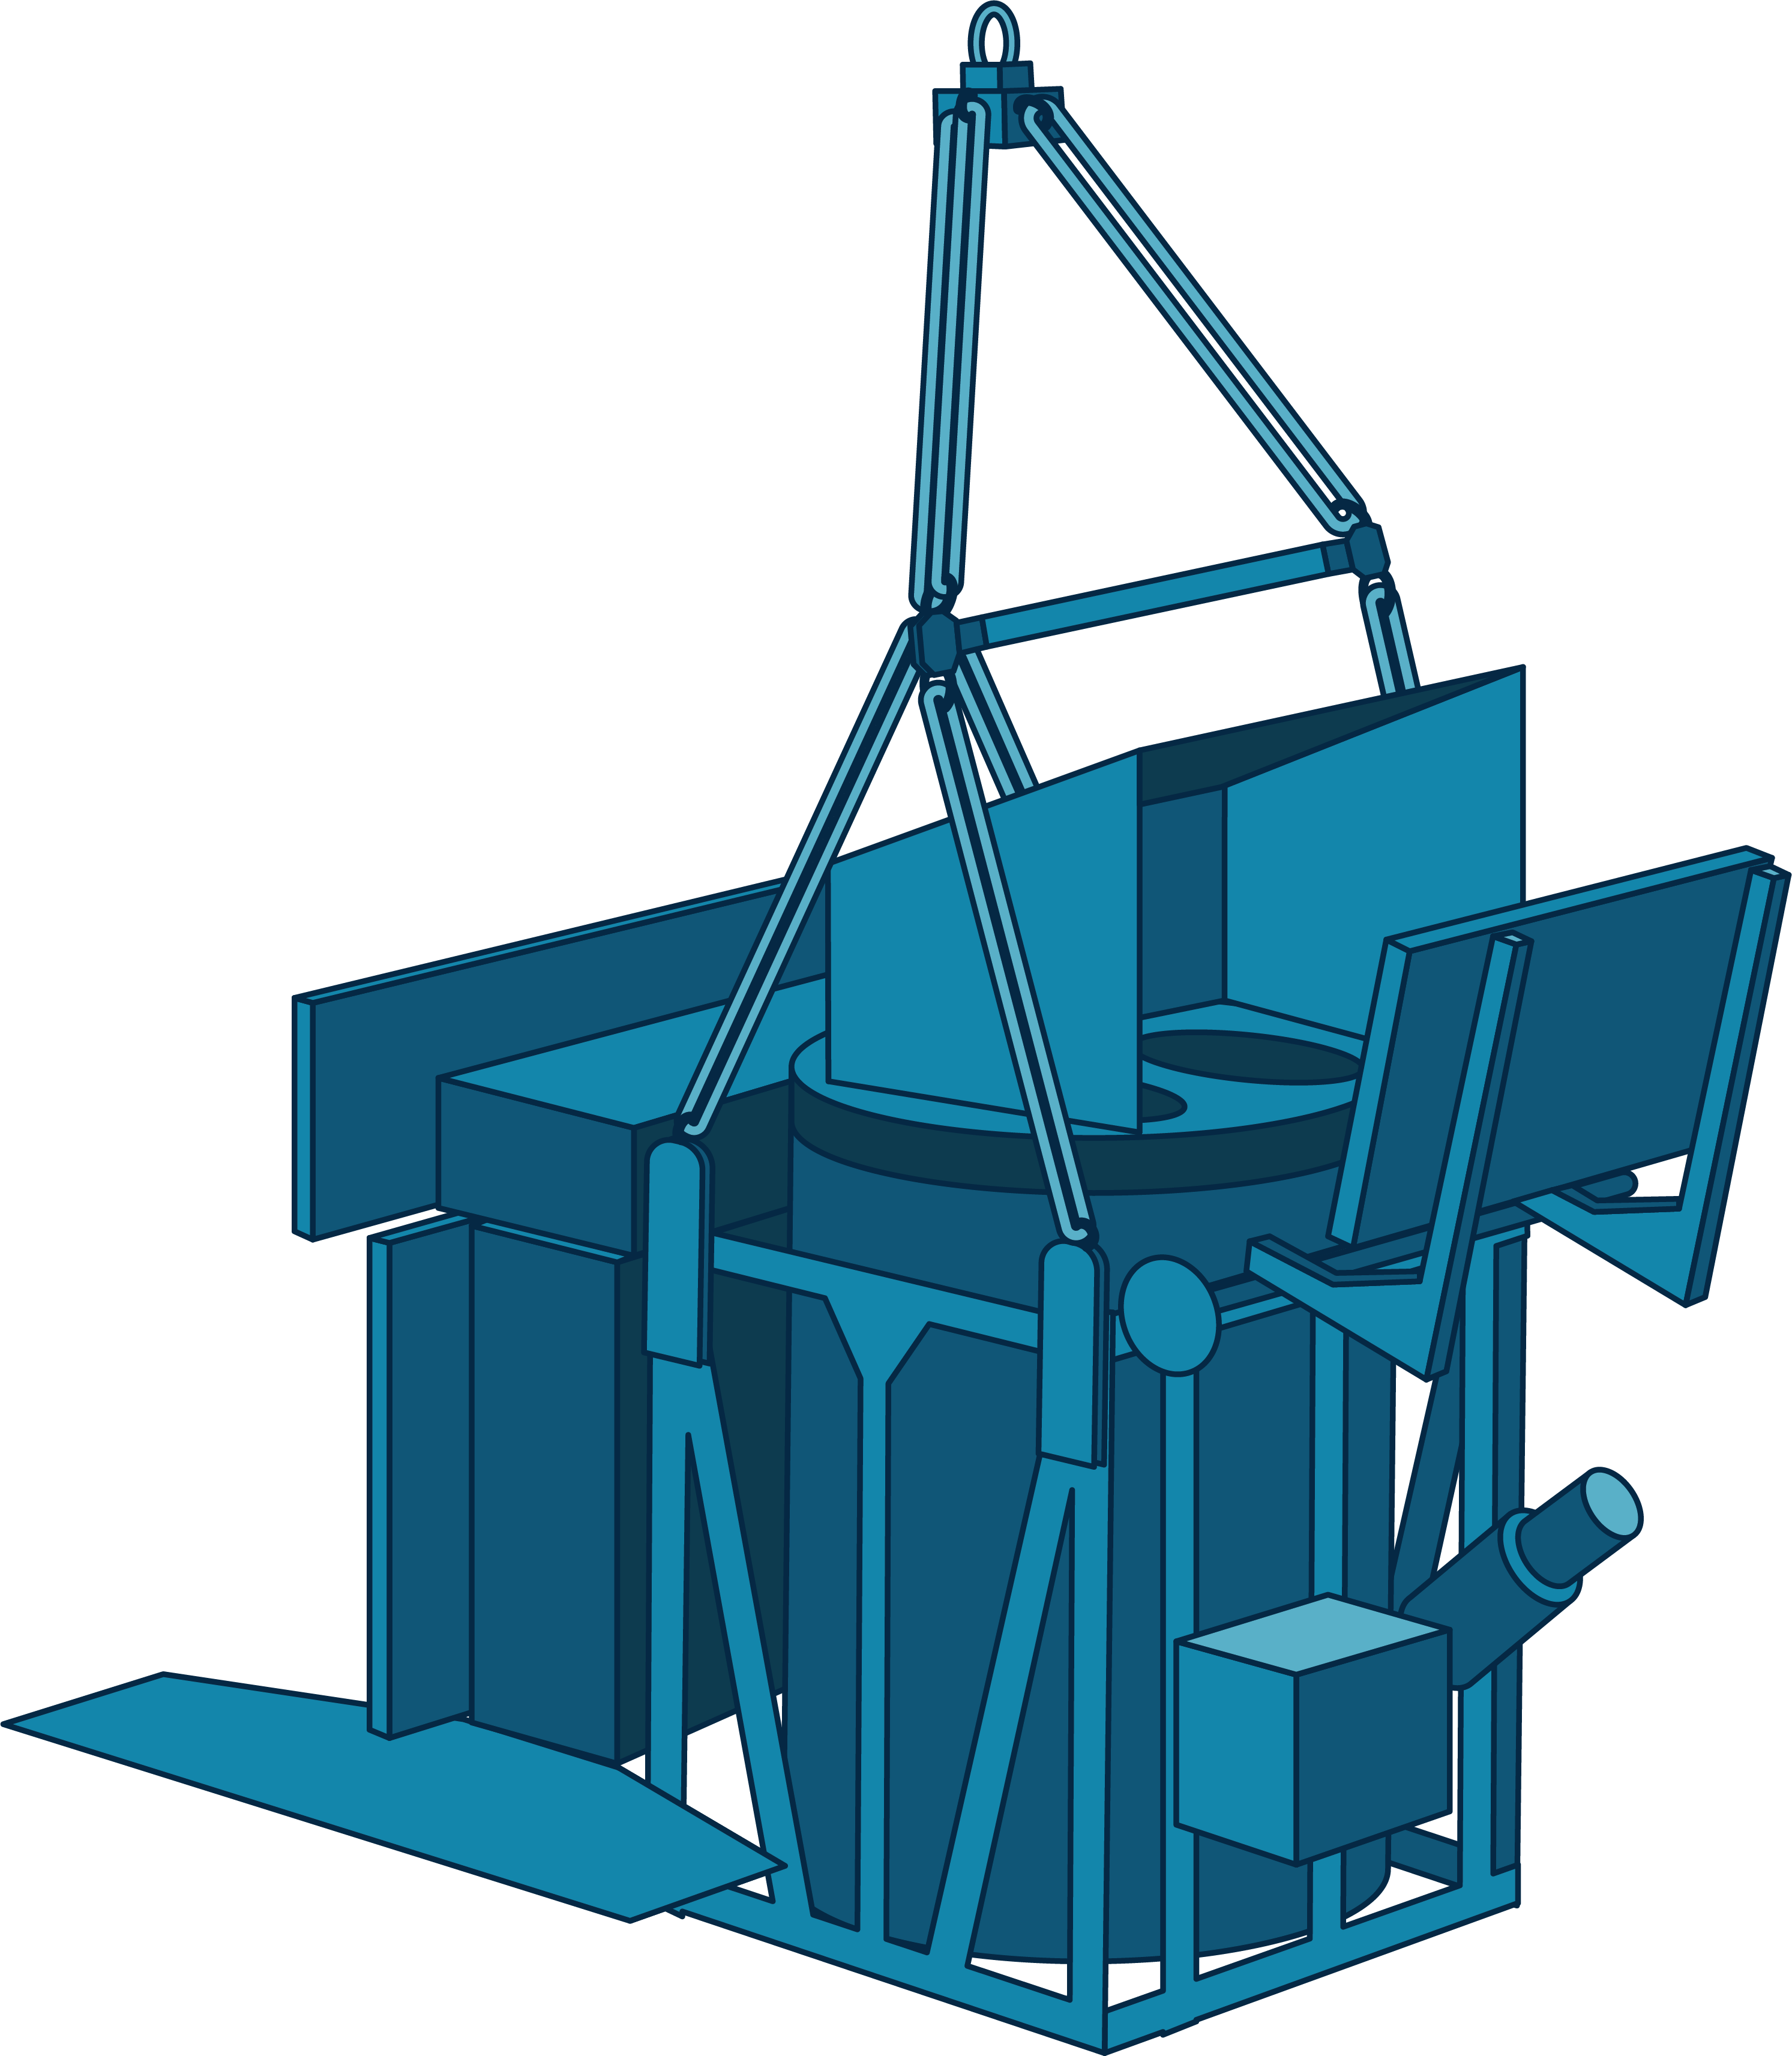 This illustration shows NASA's PIPER instrument in shades of blue. Piper has a cage-like structure with a large cylinder inside of it and smaller boxes attached around it. Long thin support pieces extend from the body upward, which will attach the payload to a large balloon.